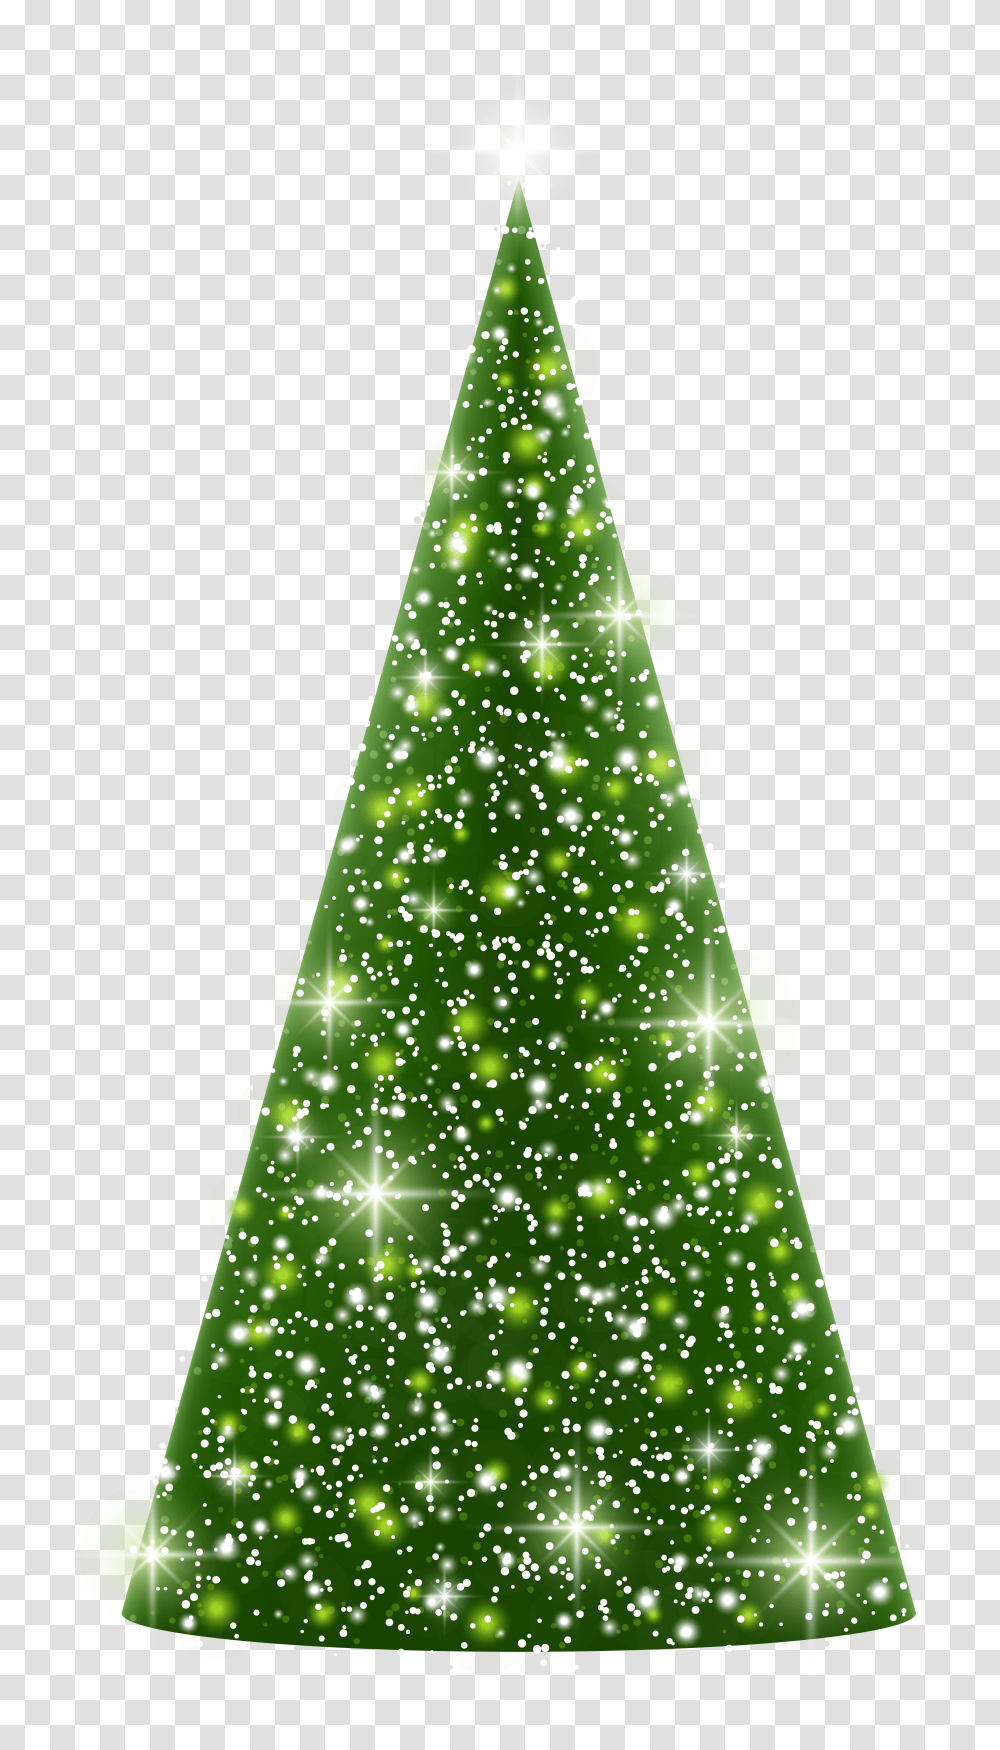 Library Of Royalty Free Evergreen Tree Files Christmas Tree Transparent Png